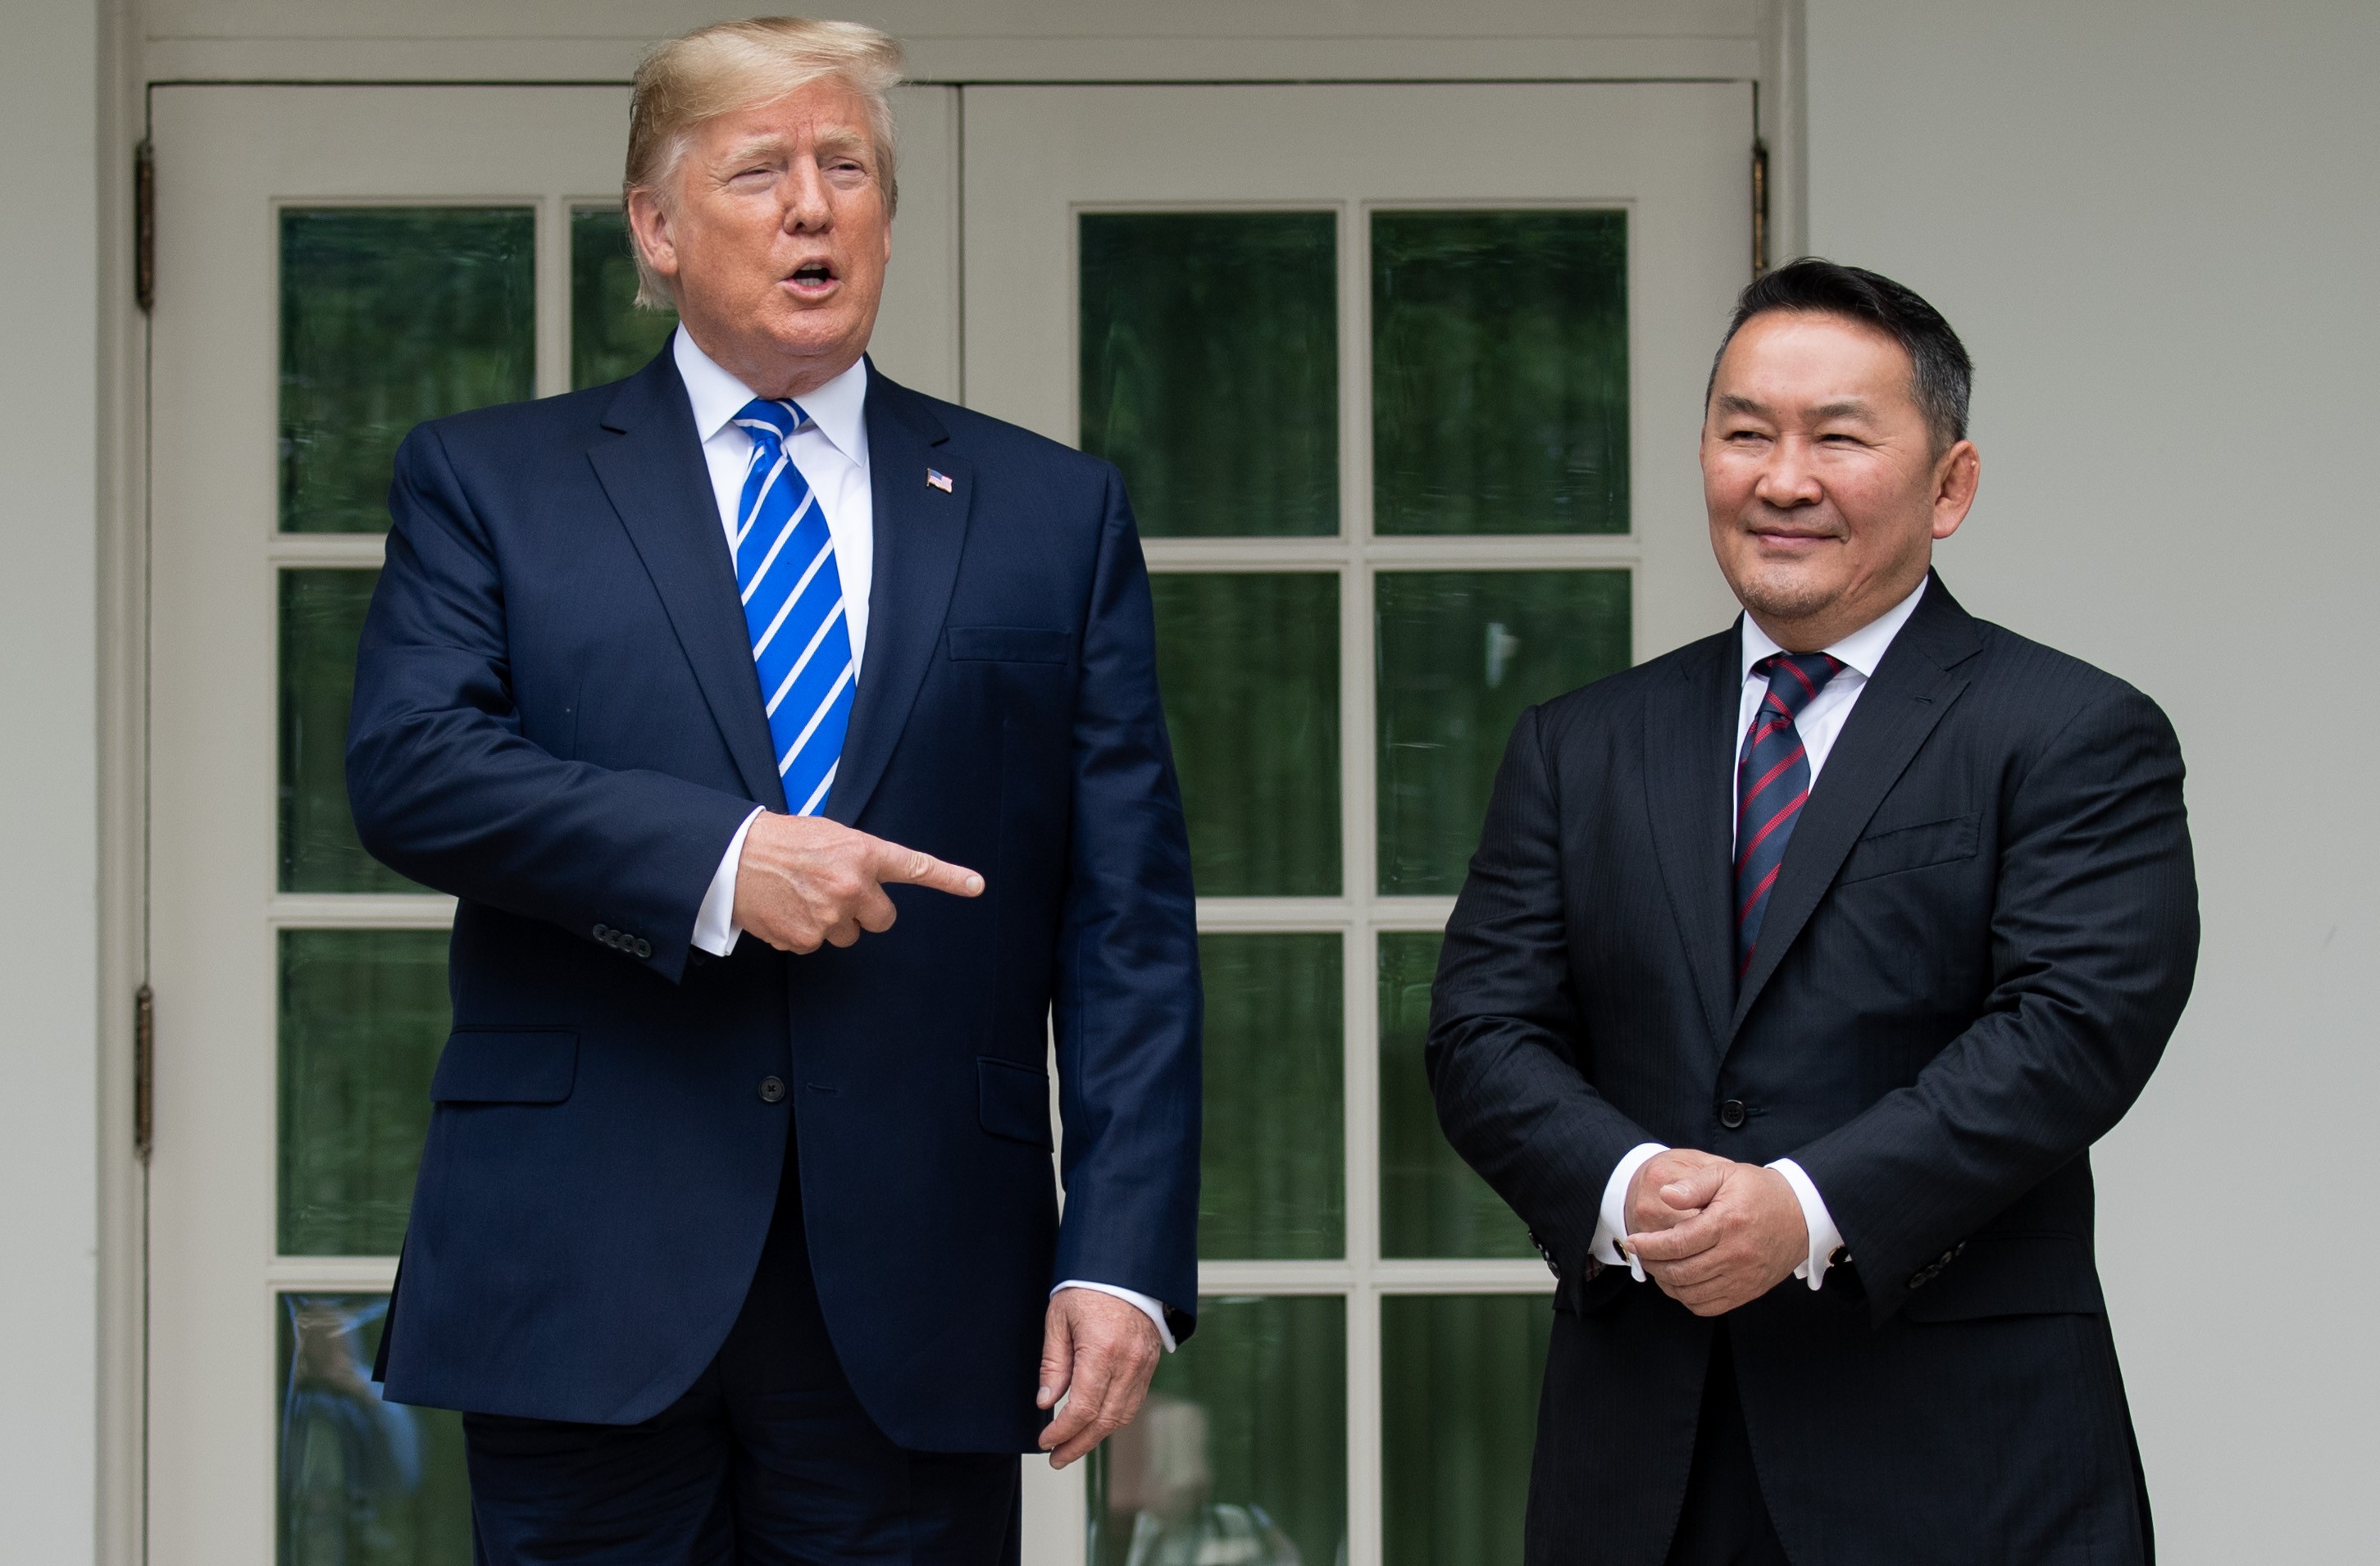 US President Donald Trump speaks with reporters as he welcomes Mongolian President Khaltmaagiin Battulga in the Rose Garden of the White House in Washington on July 31. Photo: AFP